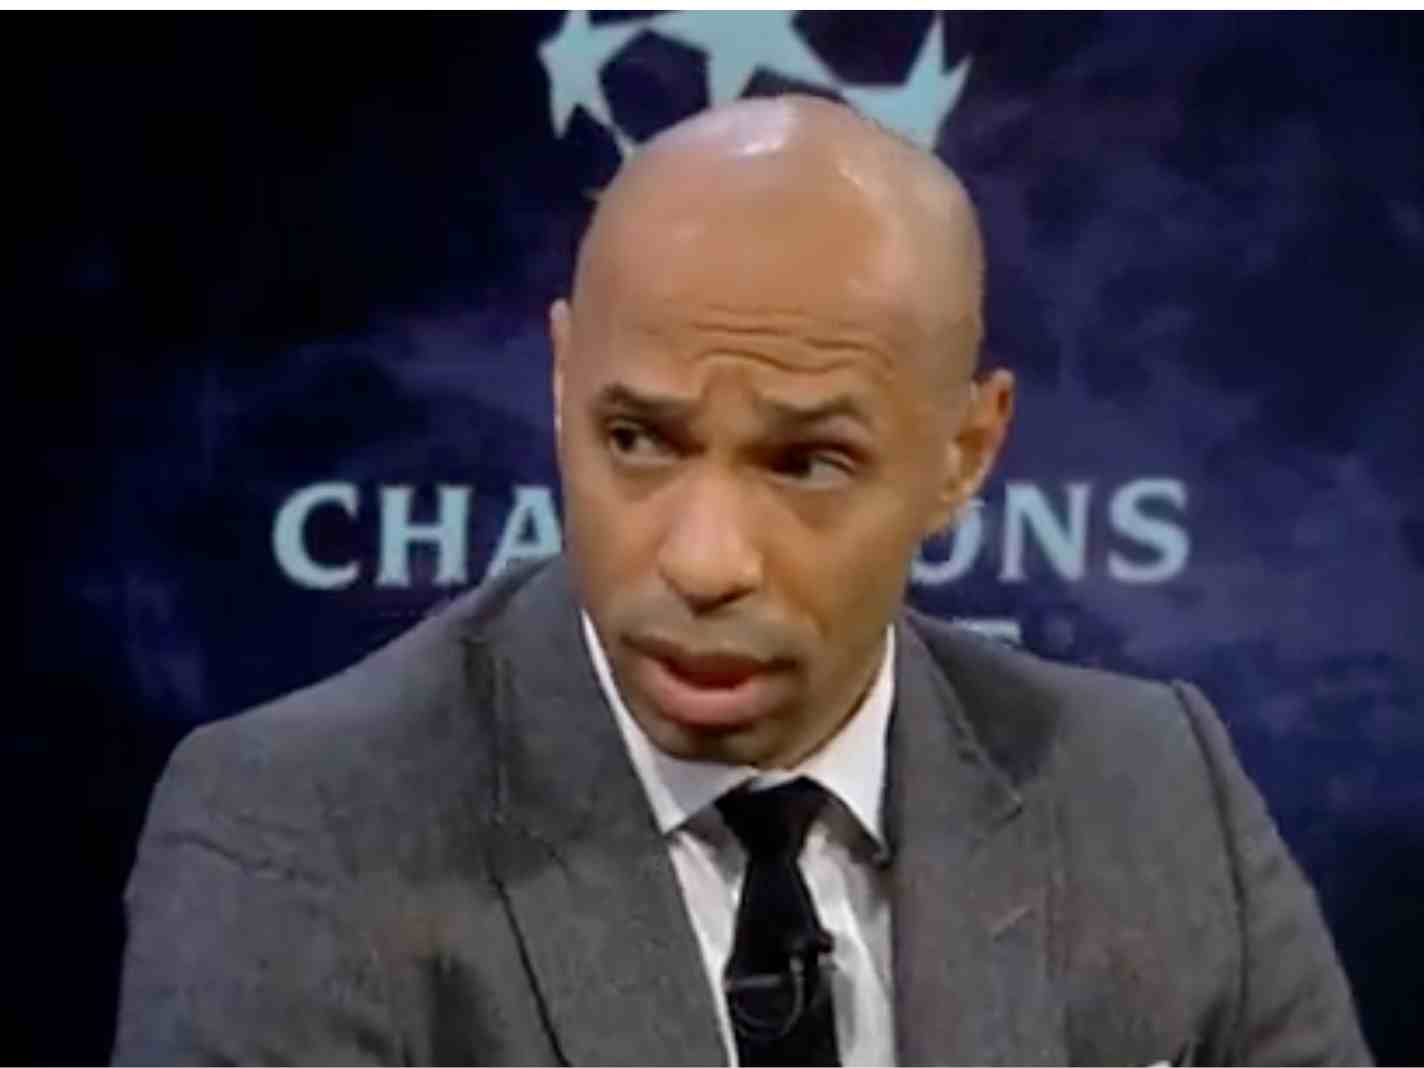 Thierry Henry Makes Bold Stand Against Racism on CBS Sports: ‘Sky and BT Would Never’